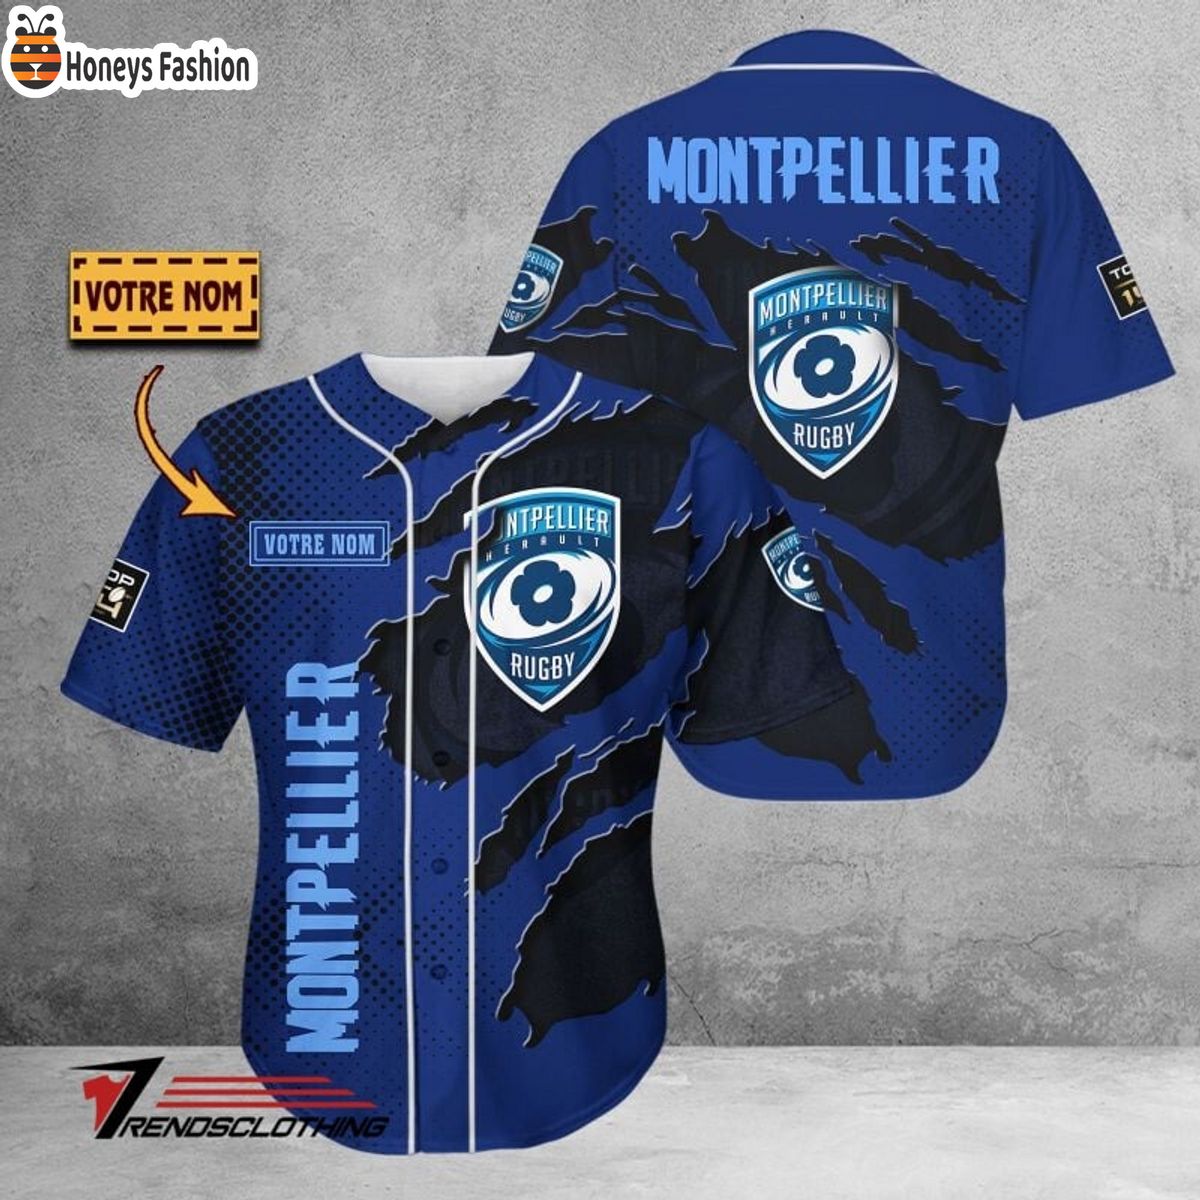 Montpellier Herault Rugby Personalized Baseball Jersey